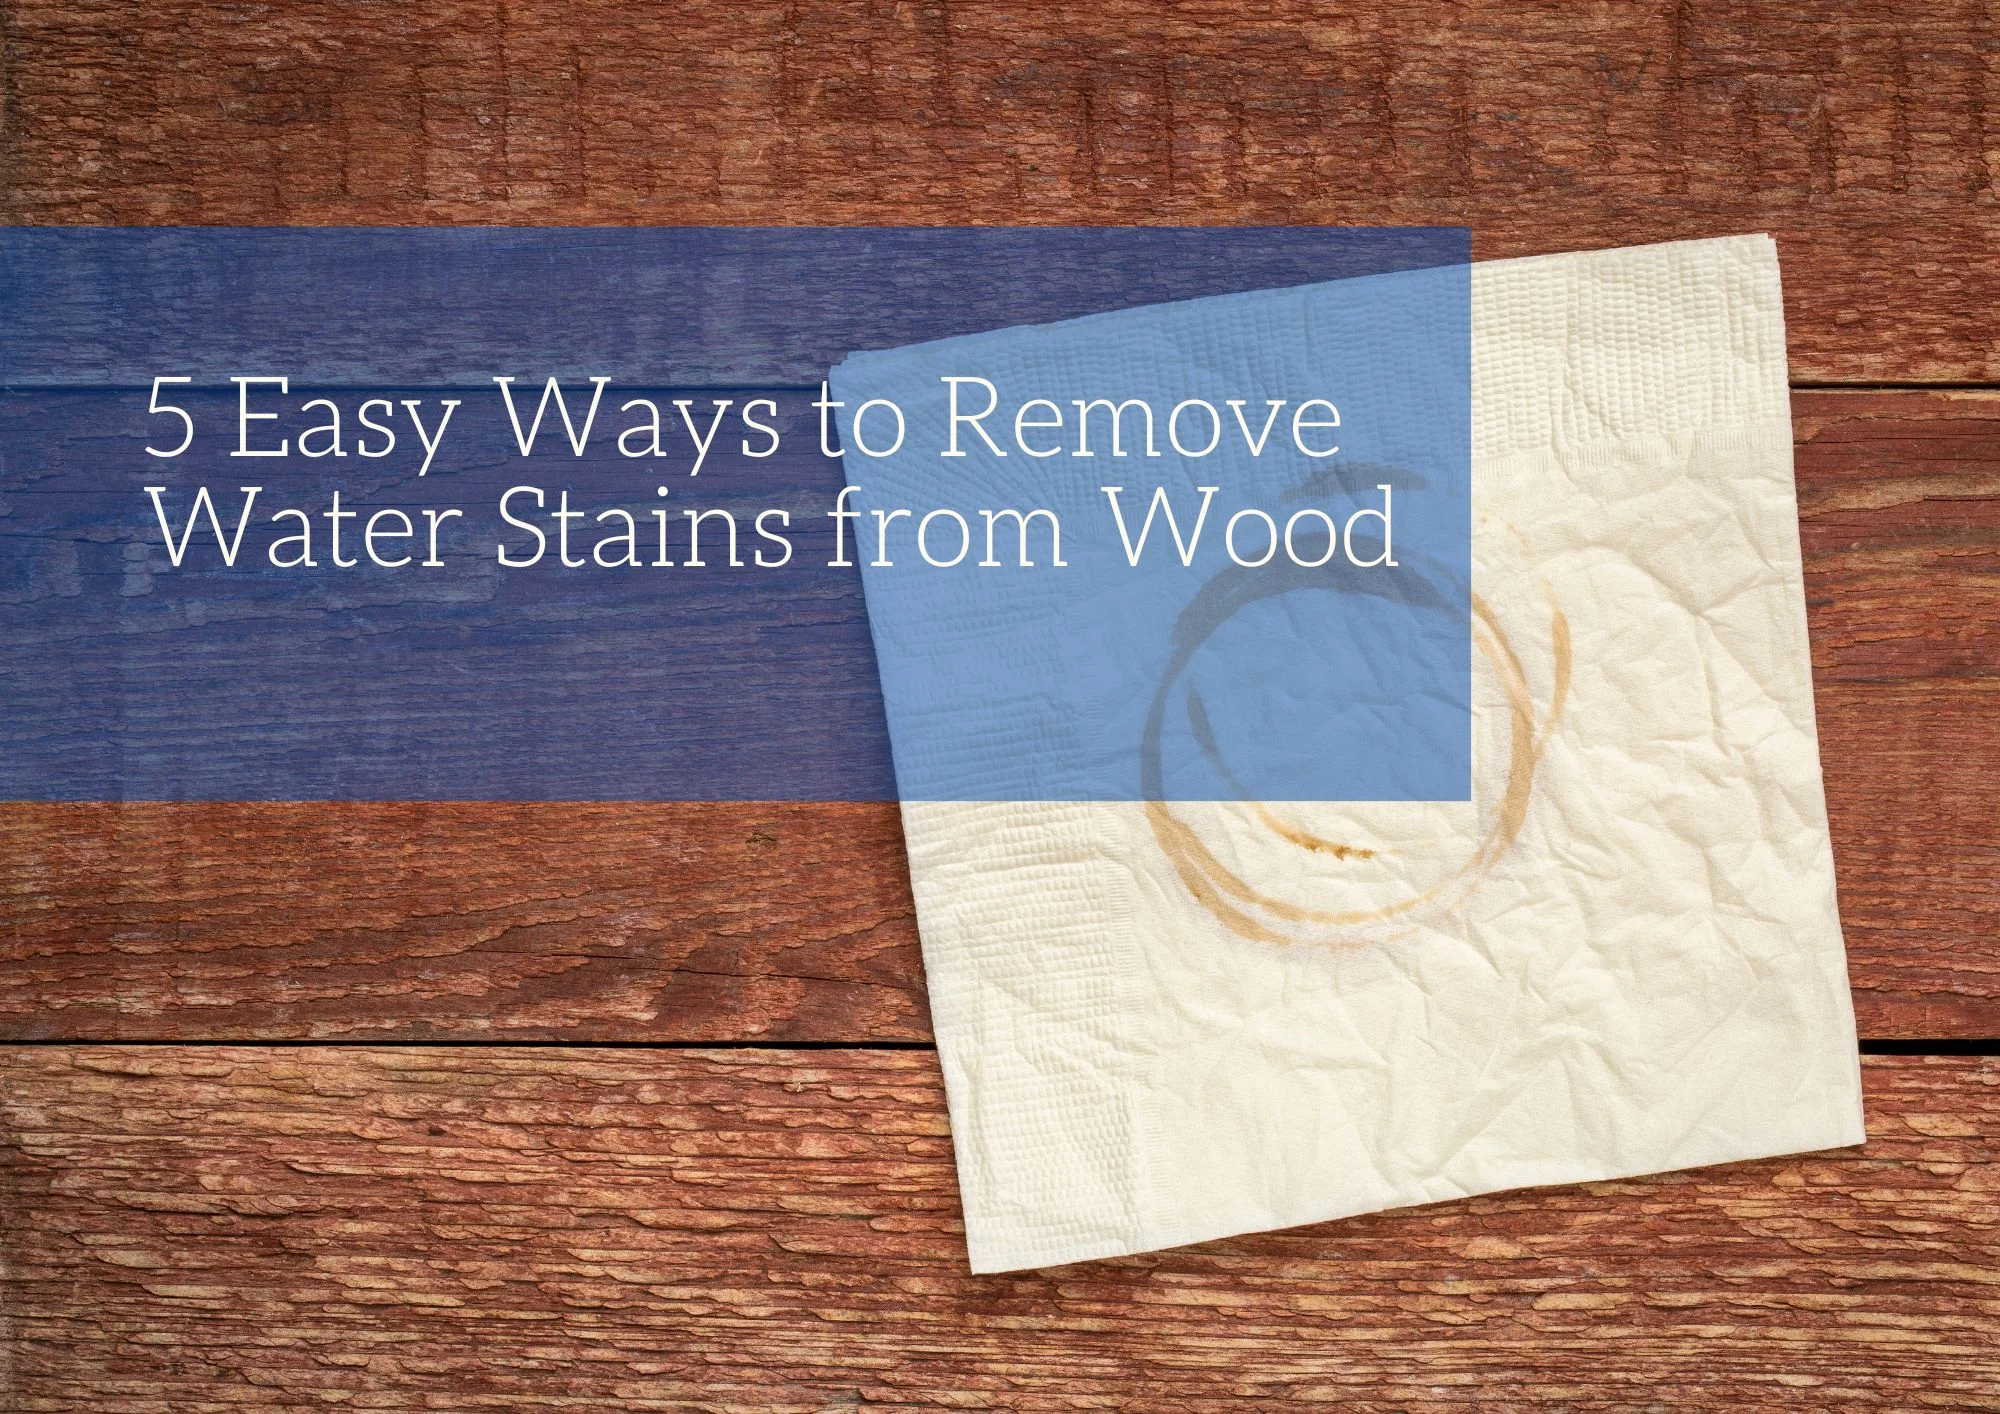 5 Easy Ways to Remove Water Stains from Wood